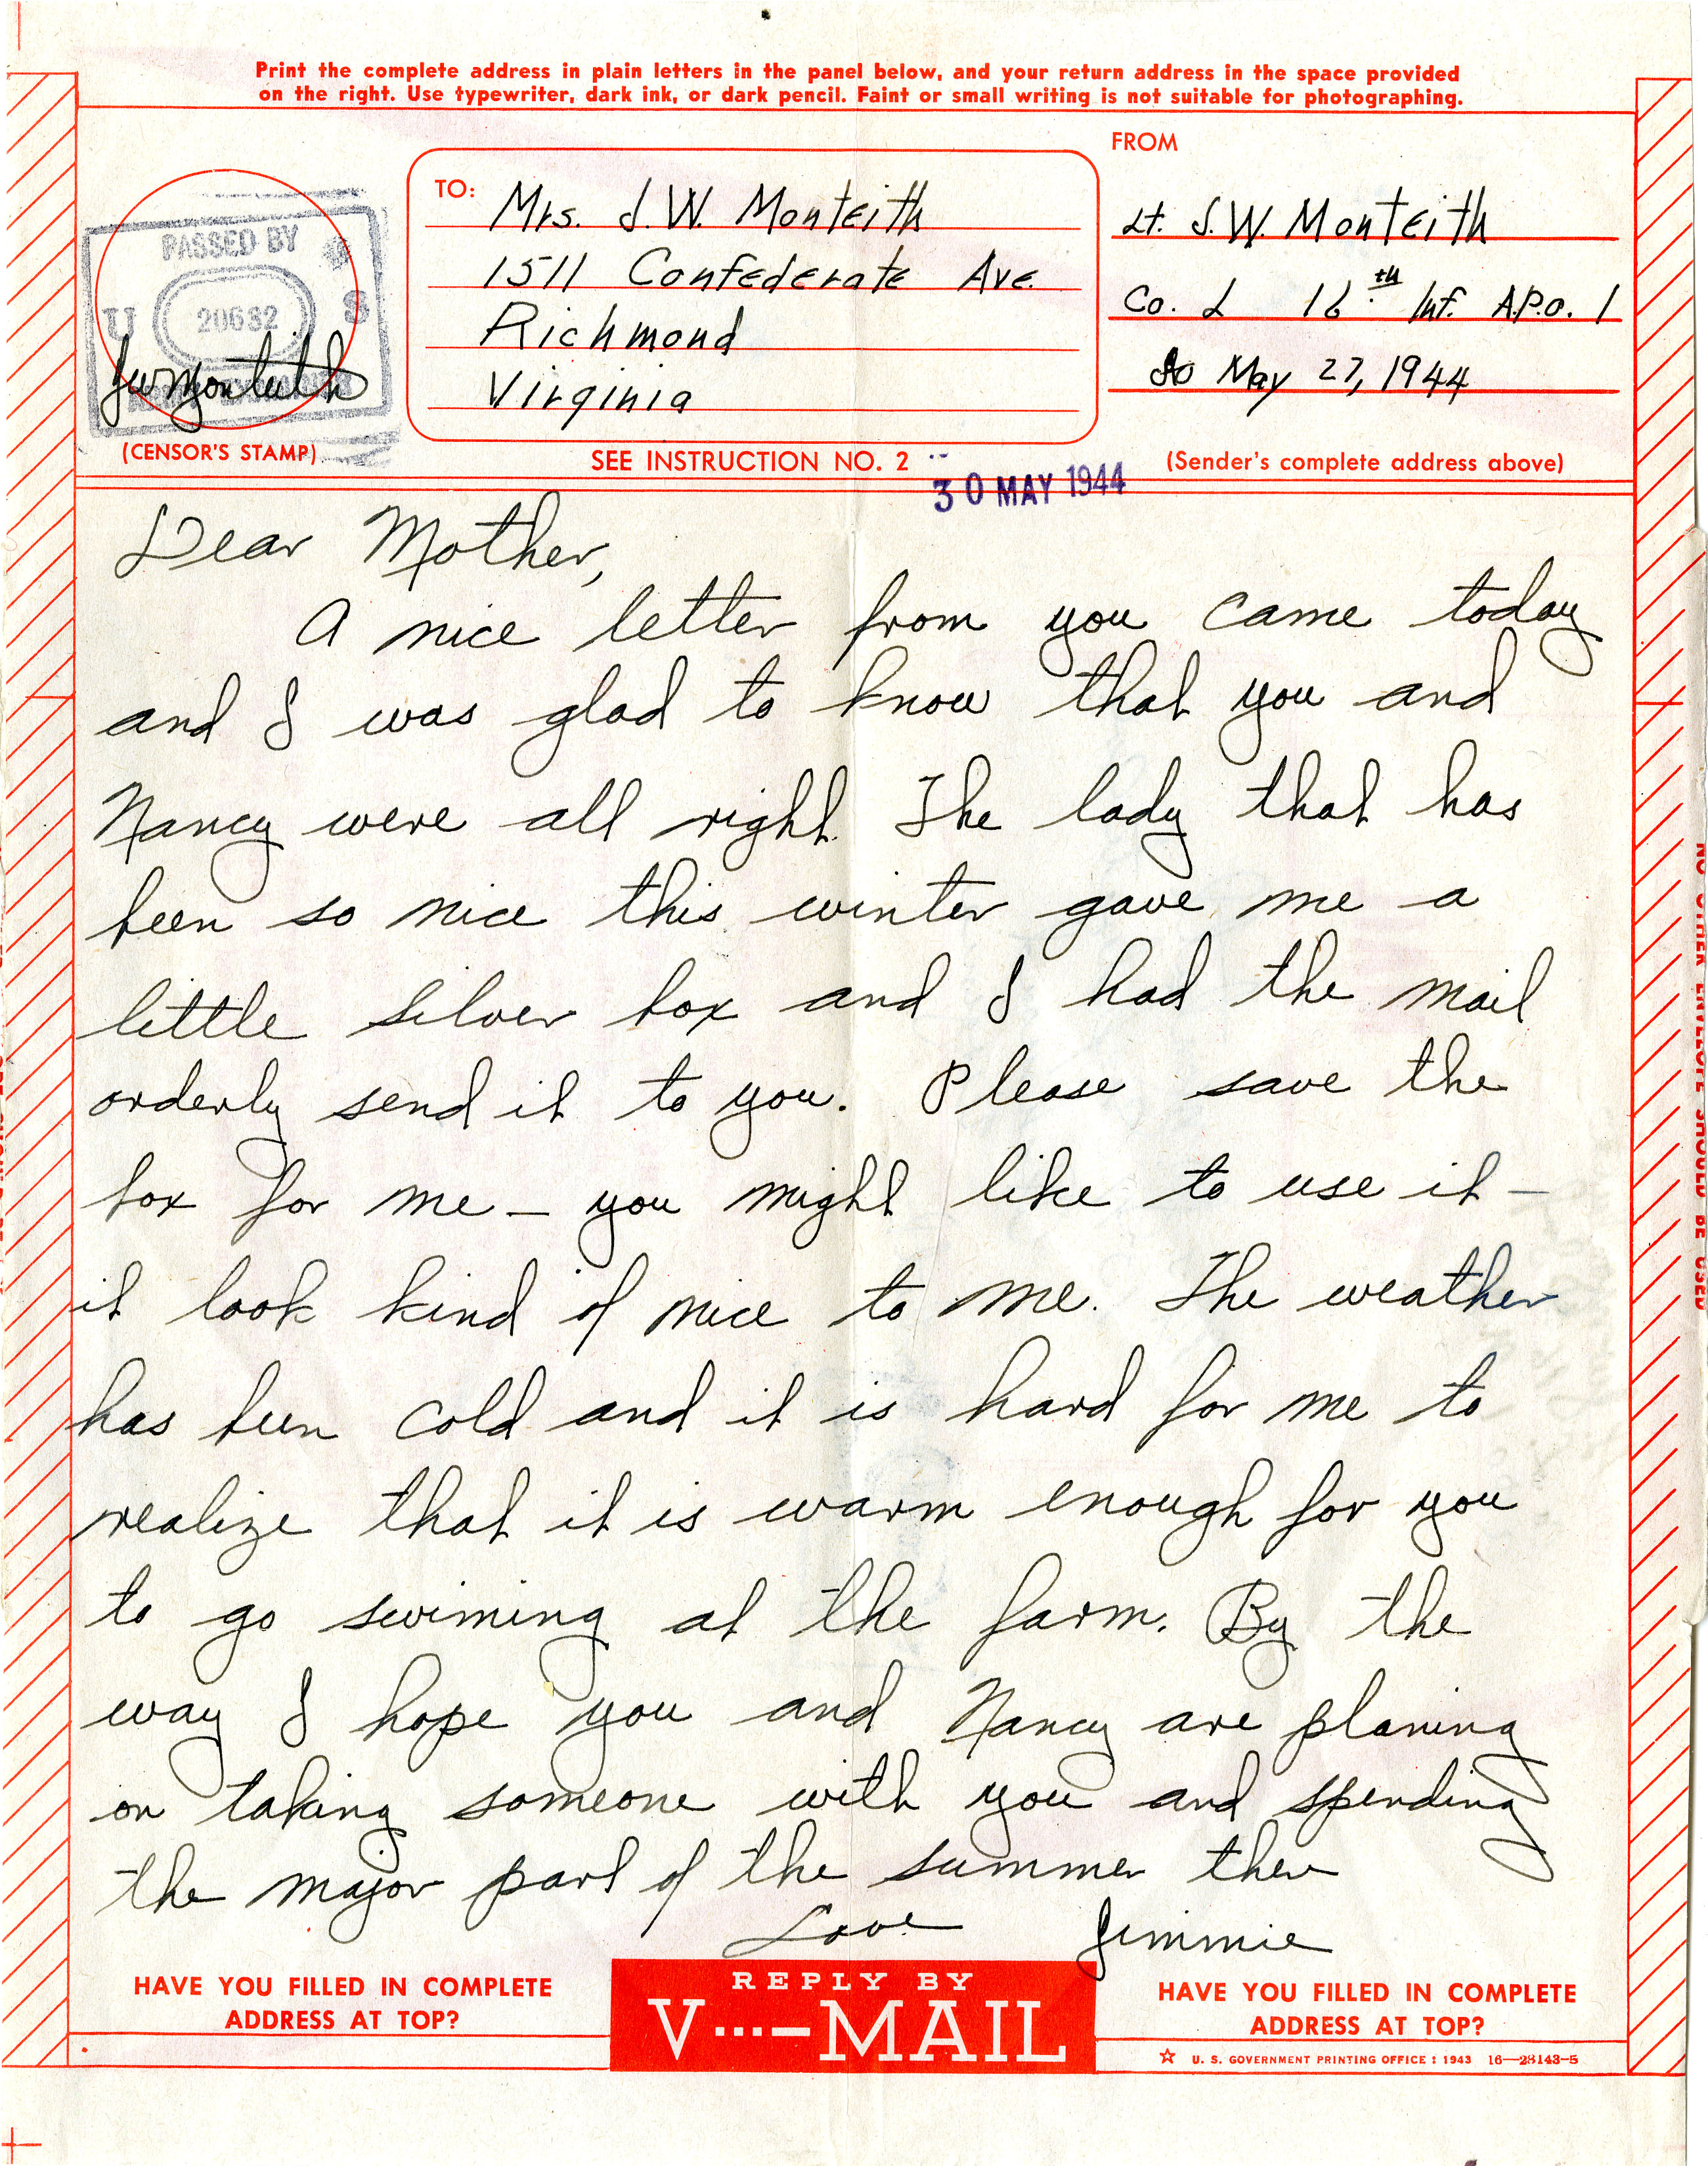 V-Mail from Lt. James Monteith, 27 May 1944